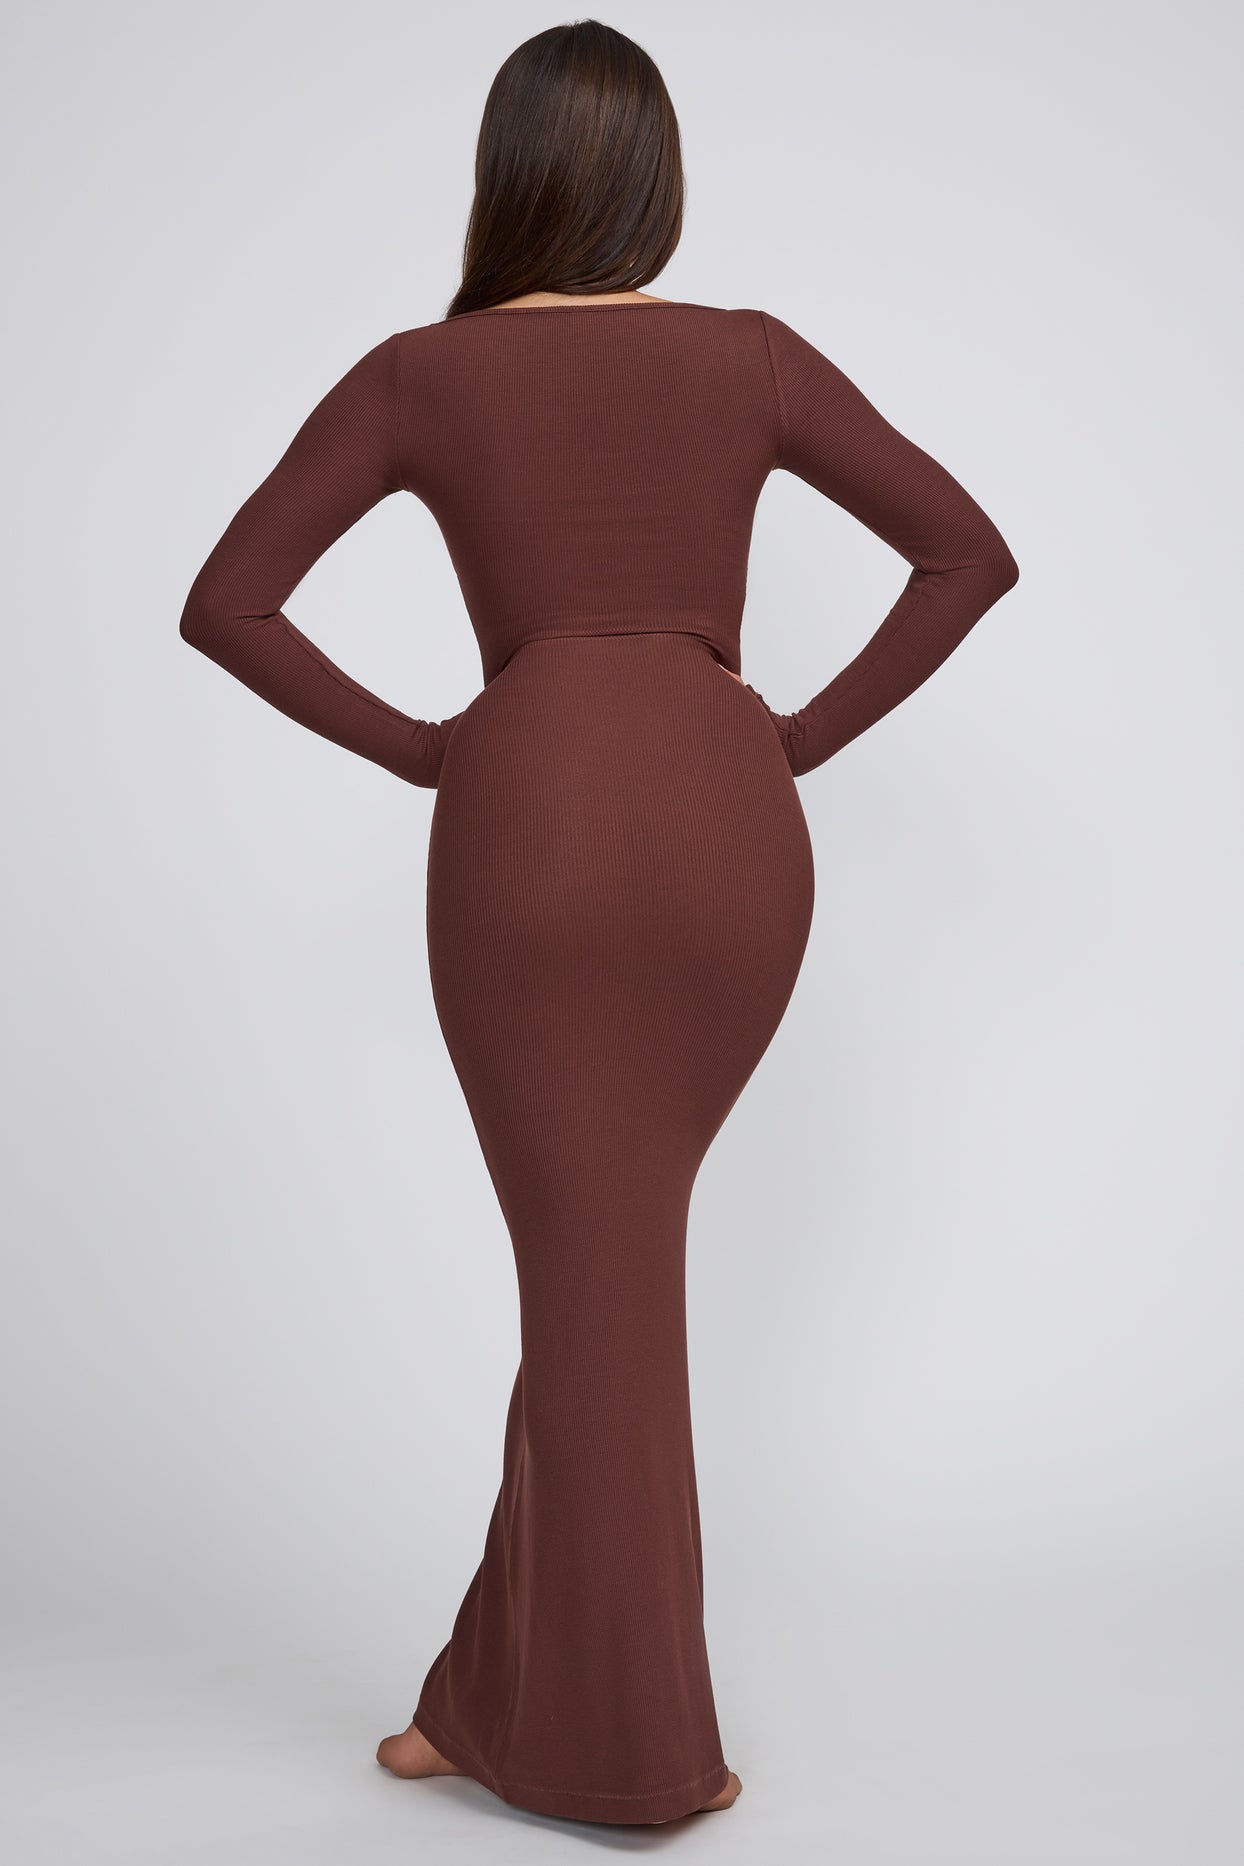 Ribbed Modal Long Sleeve Maxi Dress in Chocolate